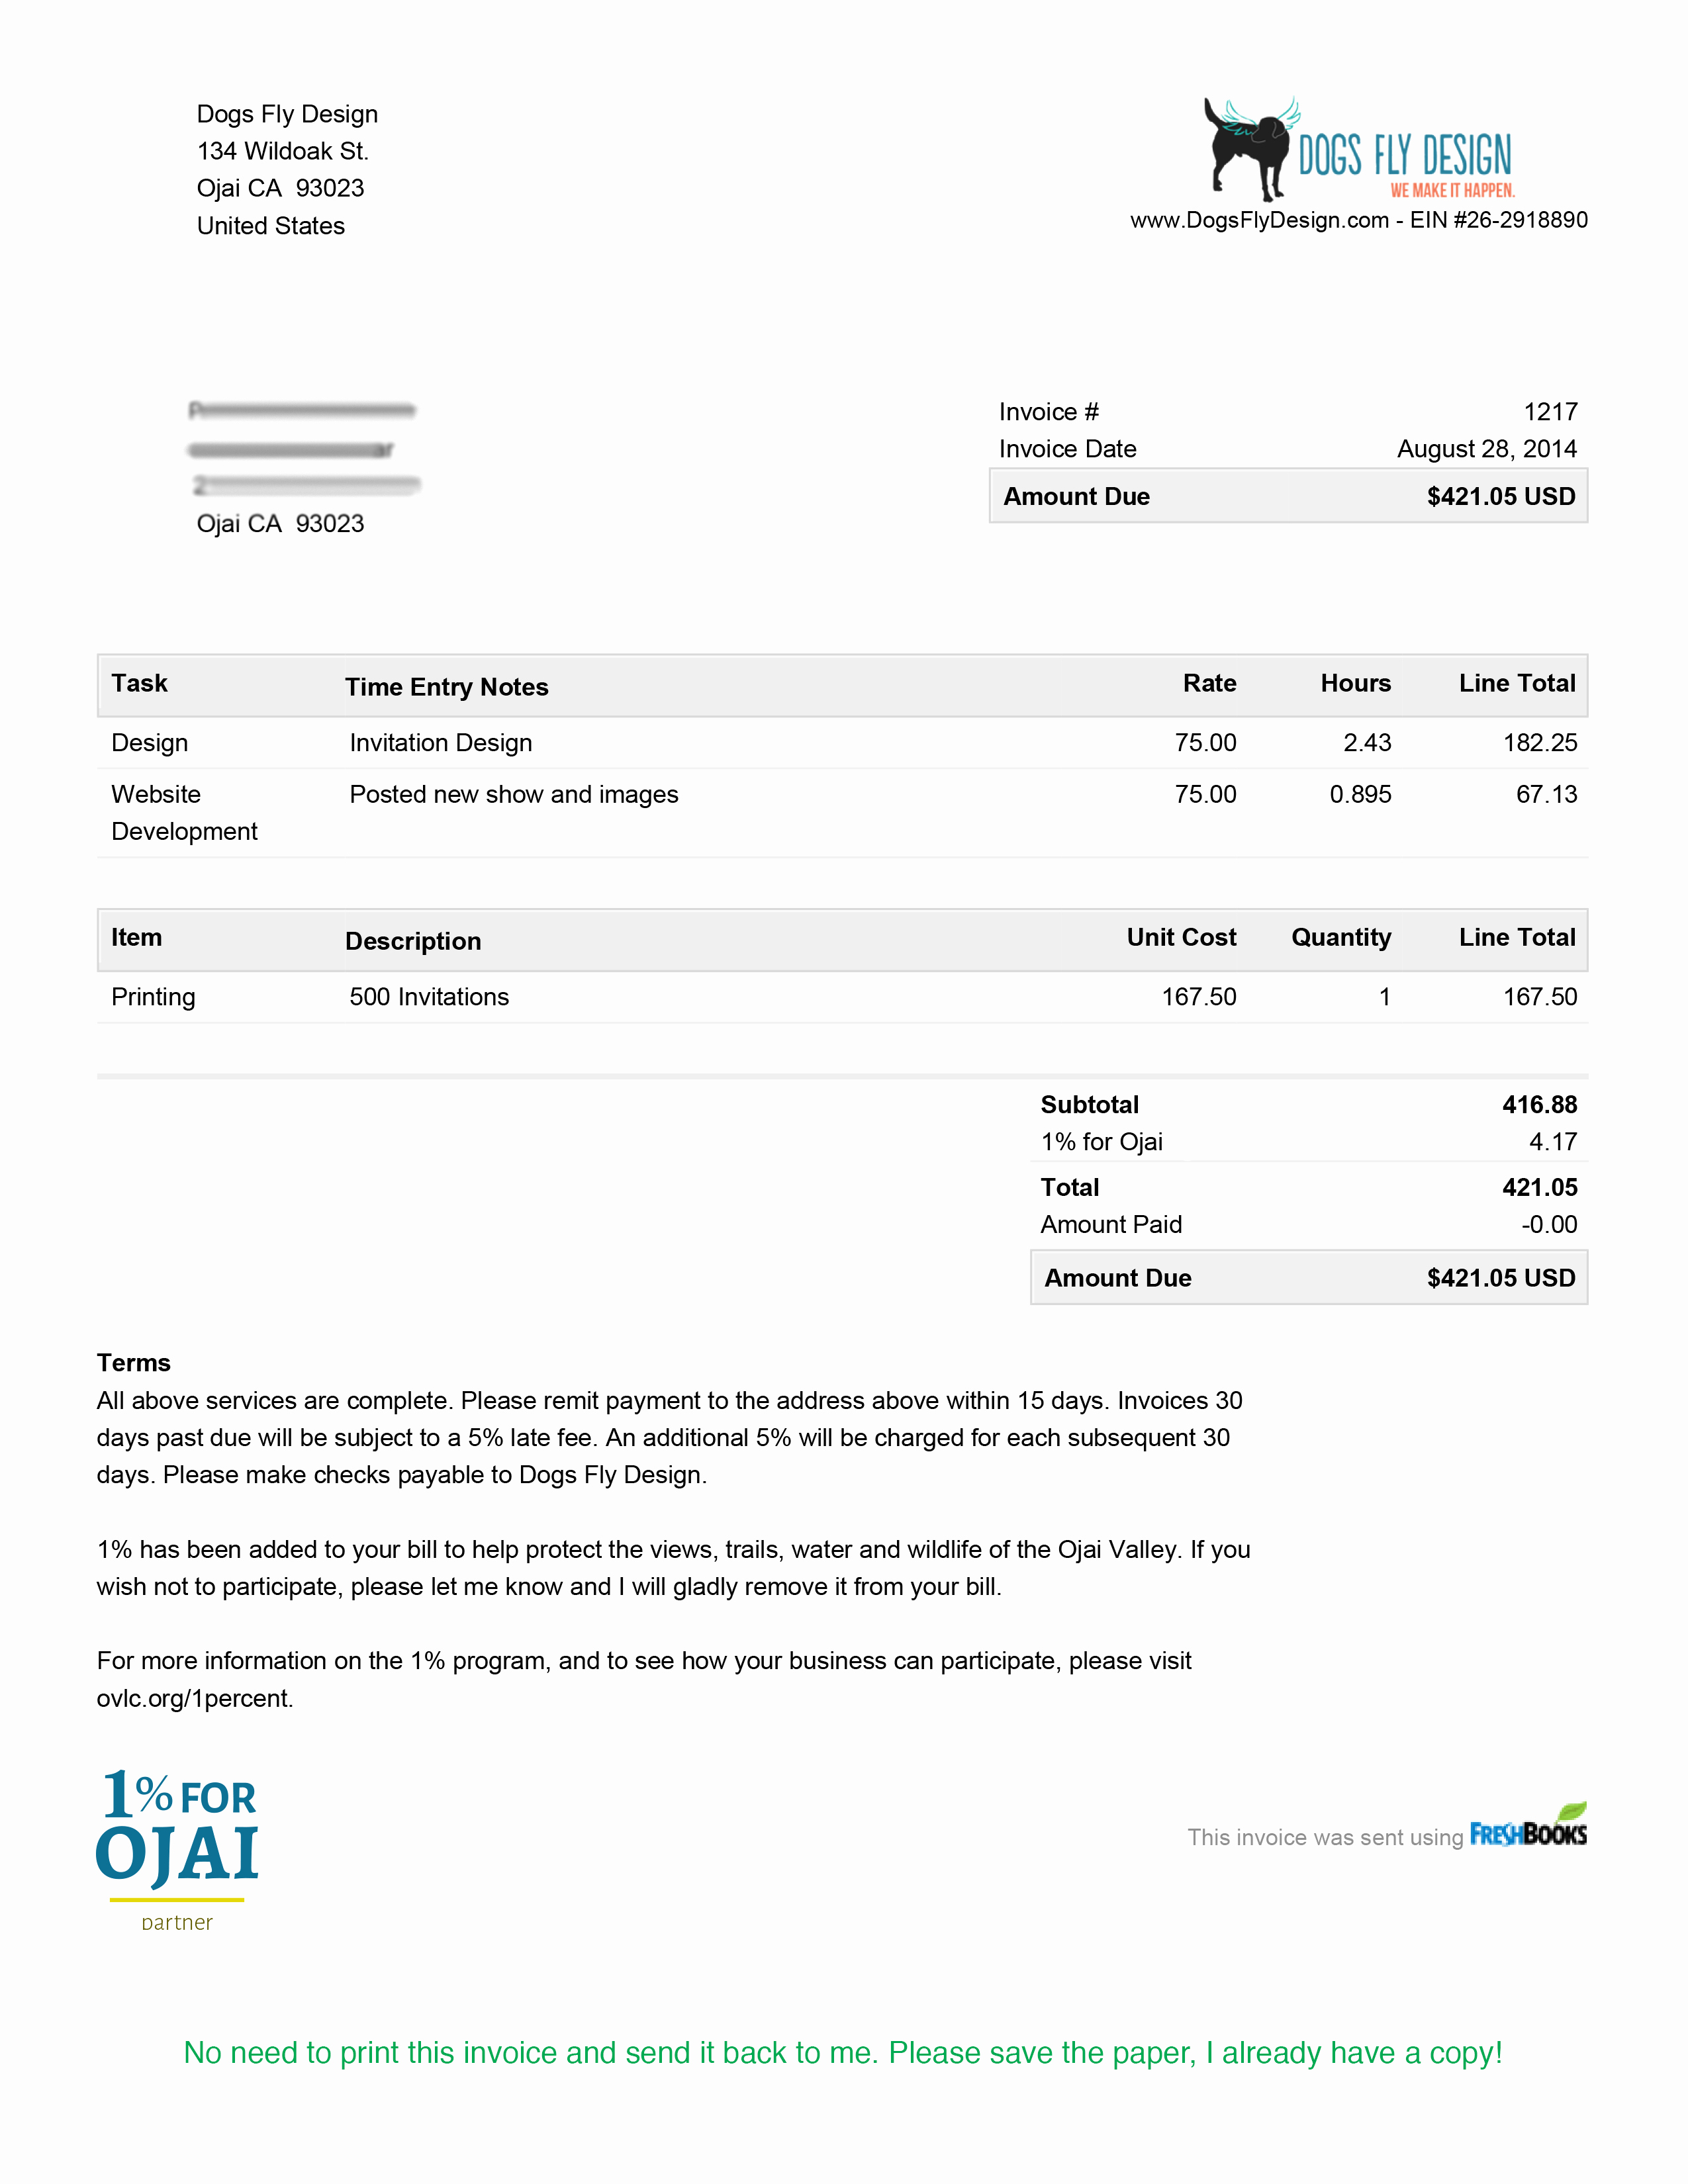 Invoice and Receipt Template Beautiful Wild About Ojai Enrollment Documents and Resources Ovlc